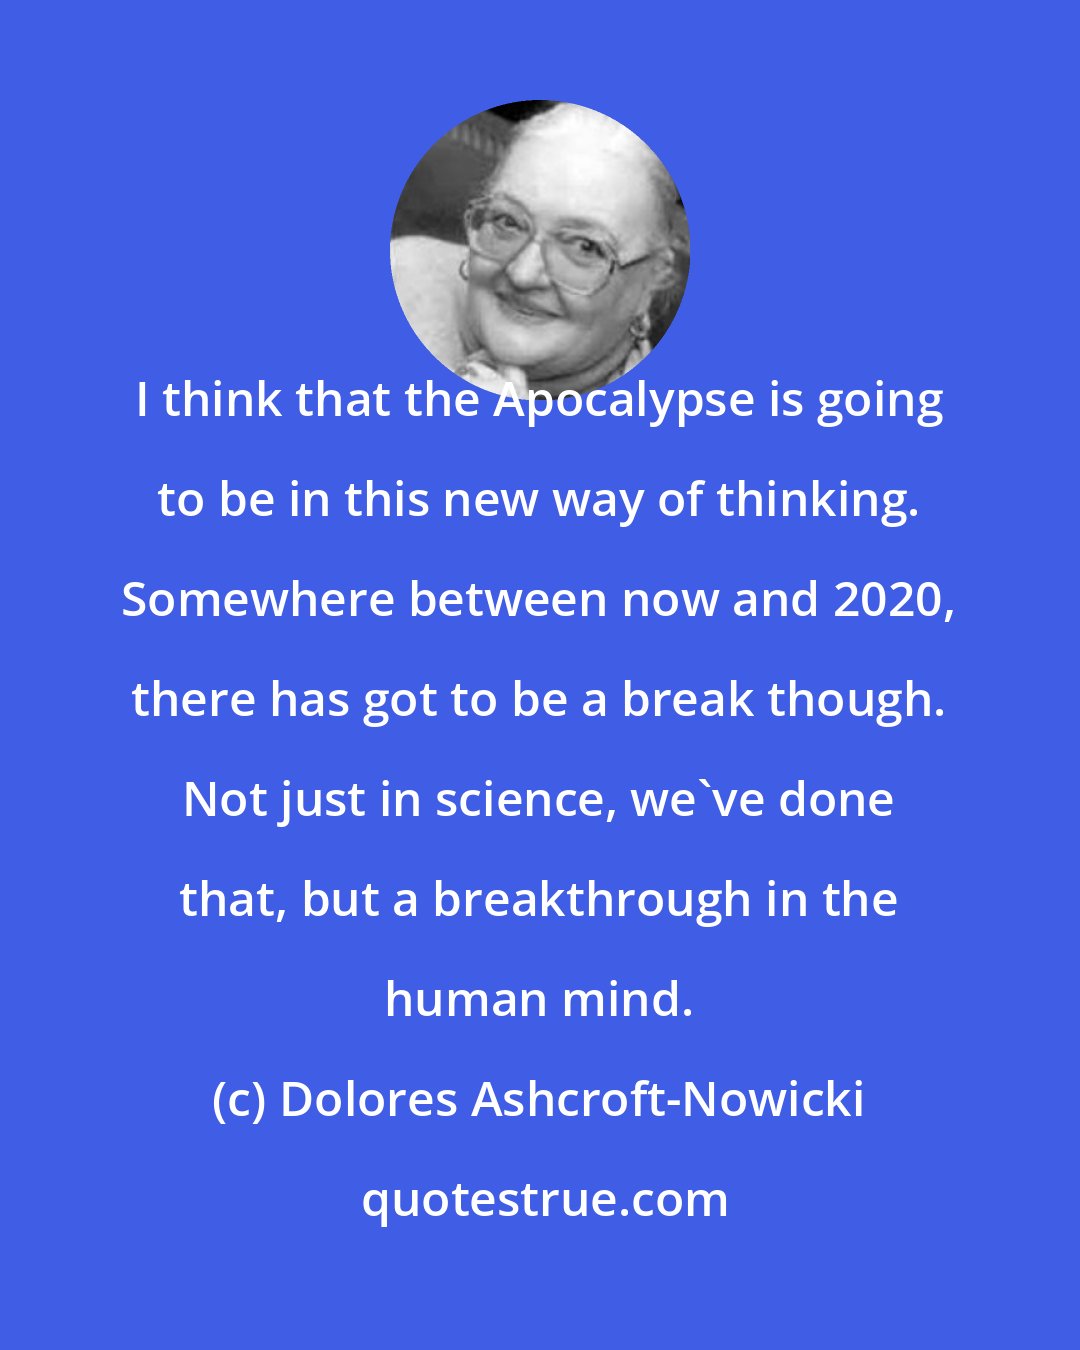 Dolores Ashcroft-Nowicki: I think that the Apocalypse is going to be in this new way of thinking. Somewhere between now and 2020, there has got to be a break though. Not just in science, we've done that, but a breakthrough in the human mind.